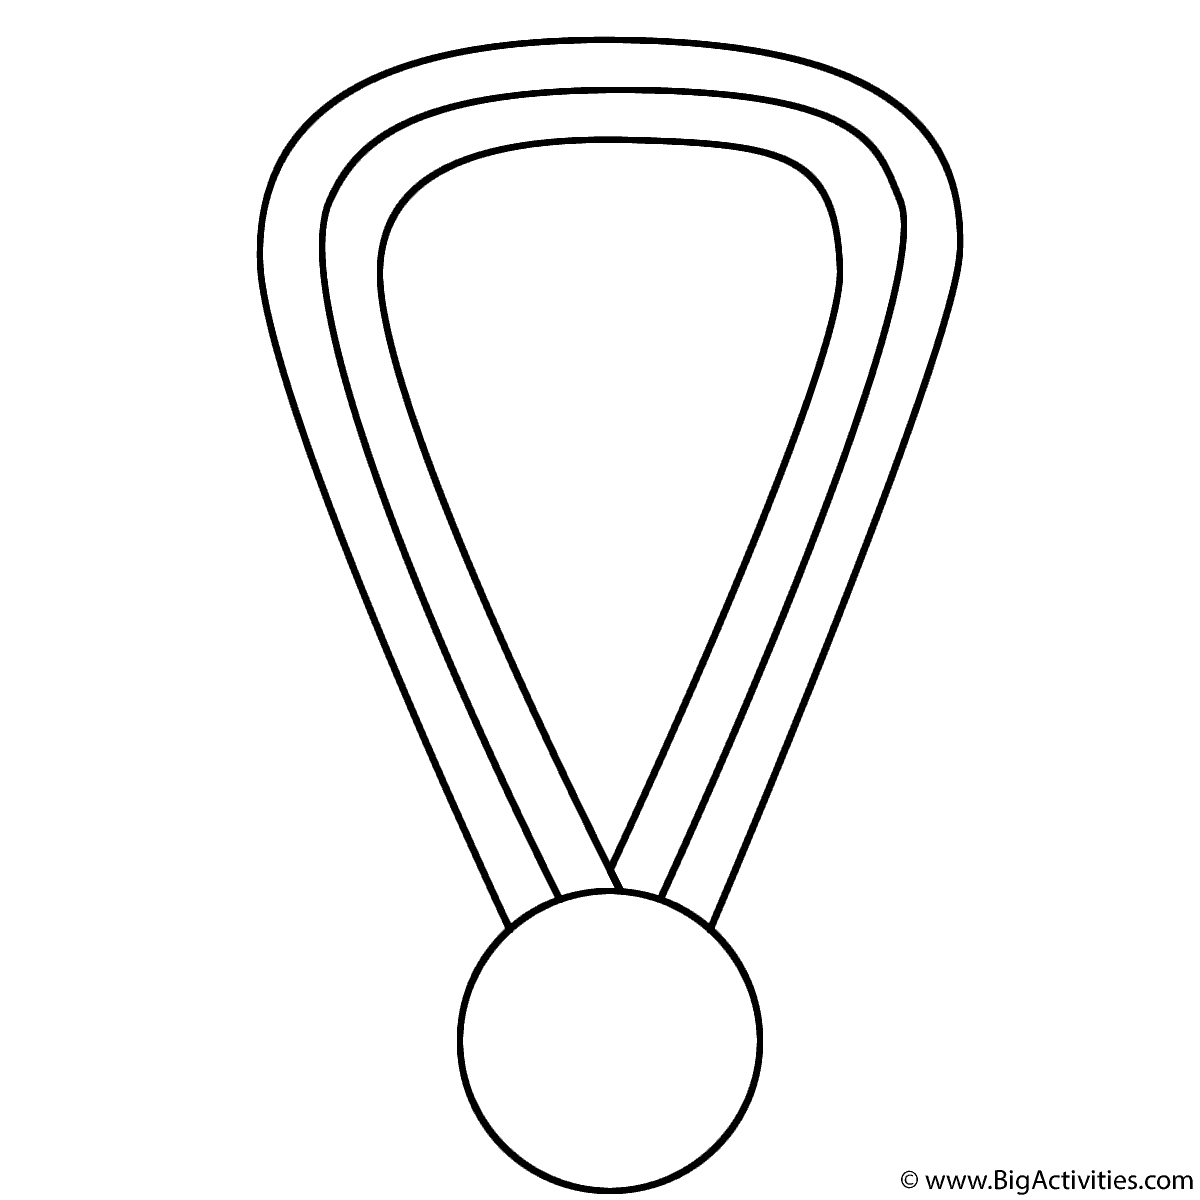 Olympic Bronze Medal - Coloring Page (Olympics)